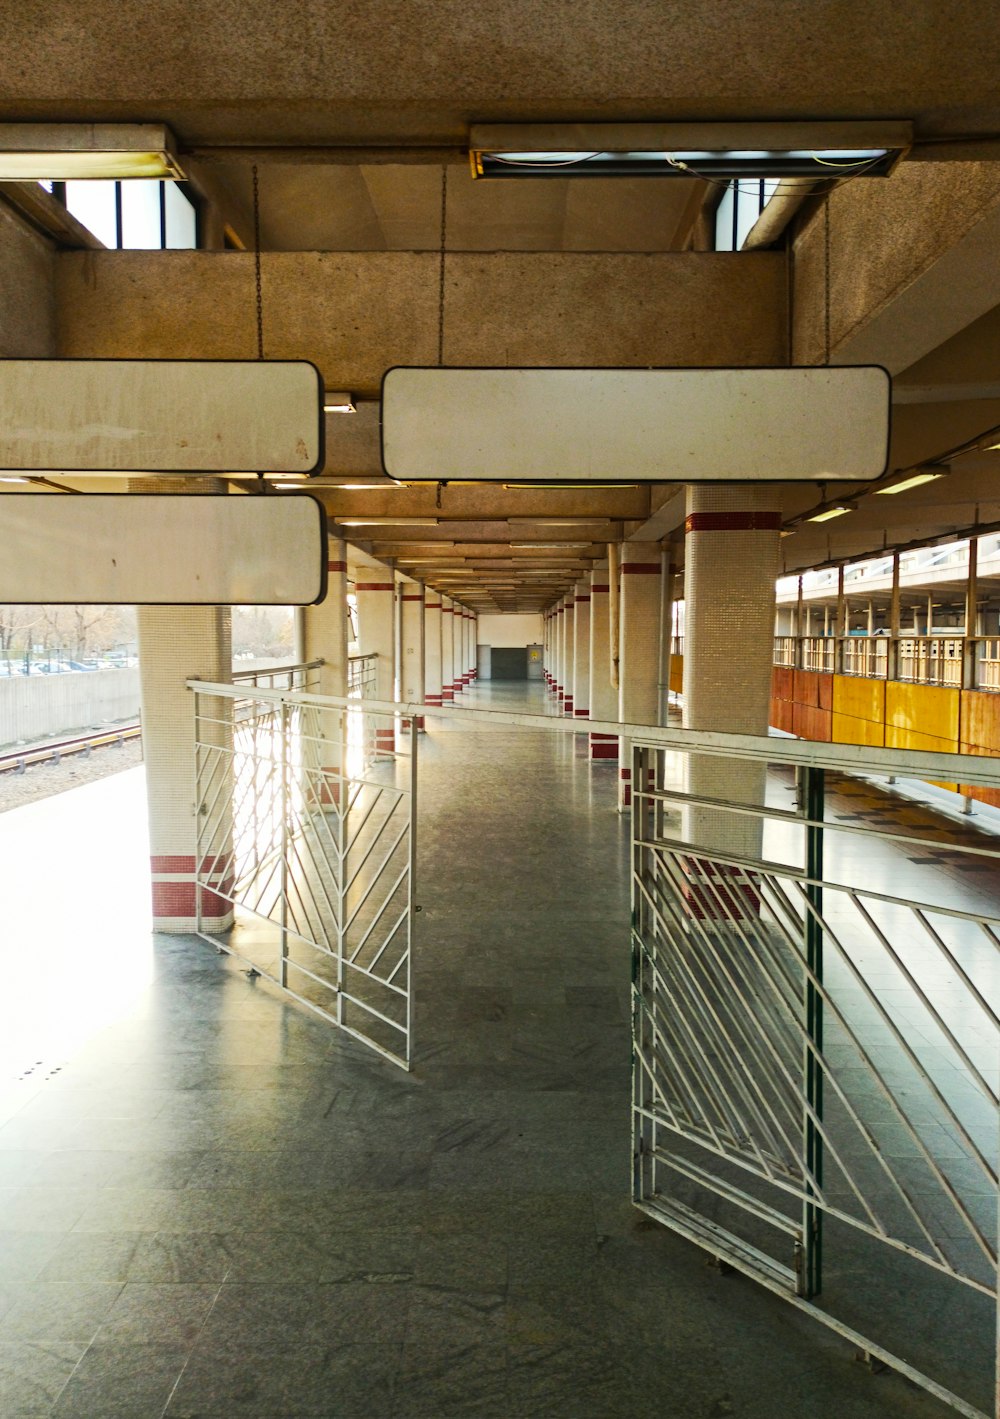 a long hallway with metal railings and windows